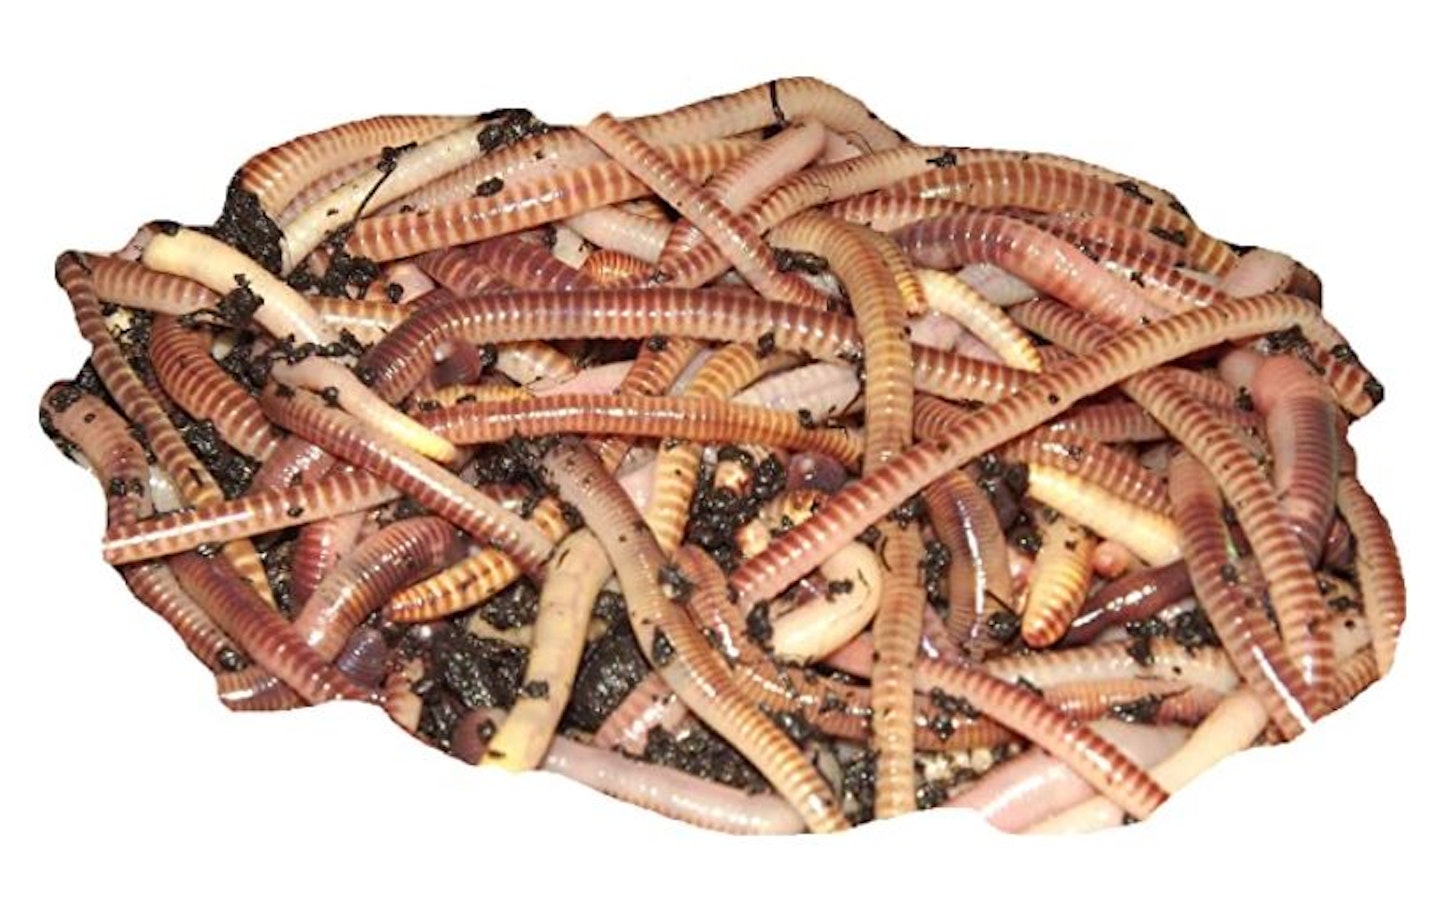 Tiger Worms from Yorkshire Worms